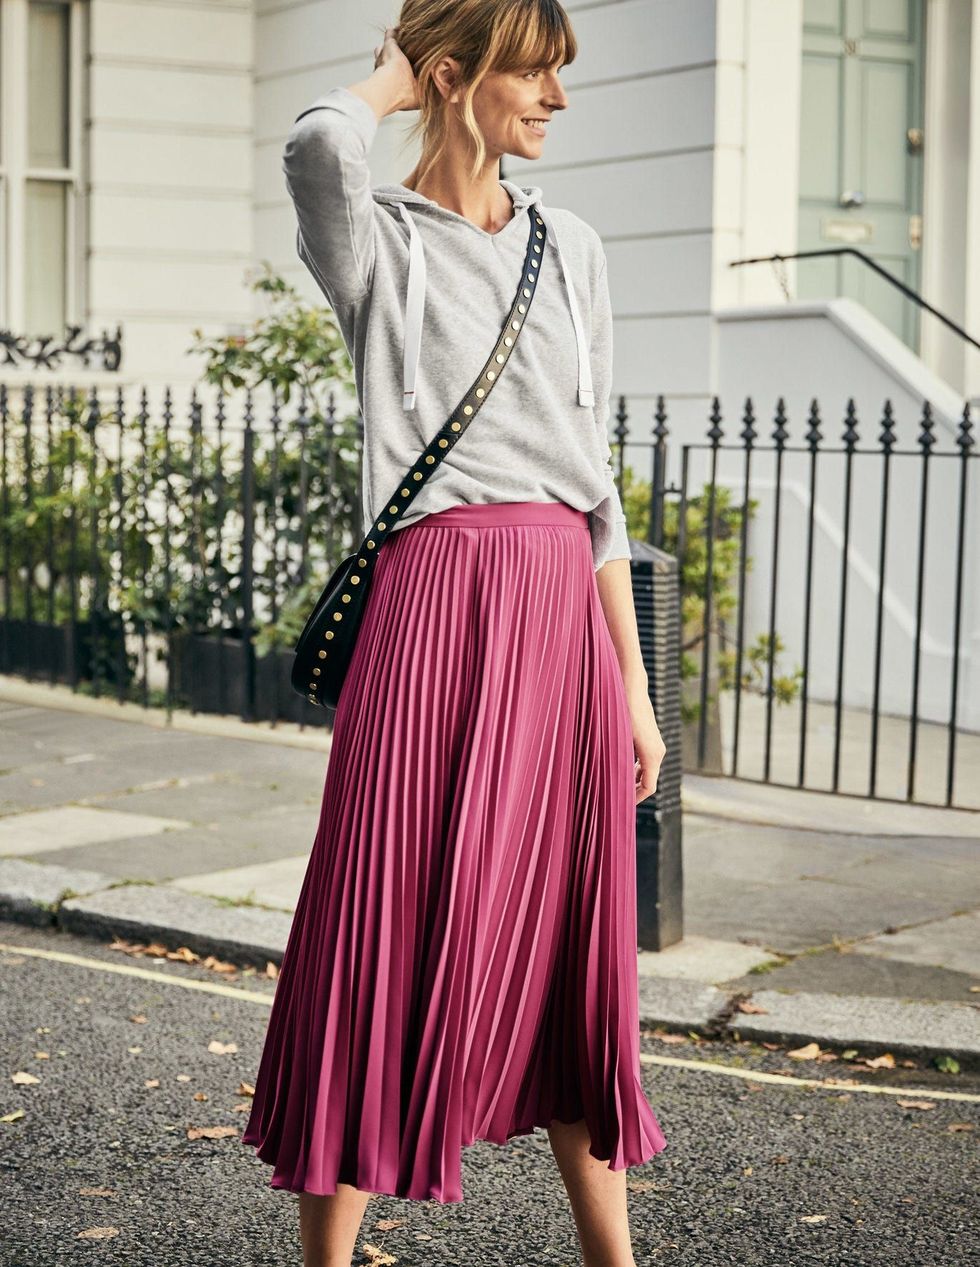 Boden's new statement skirt is a winter must-have